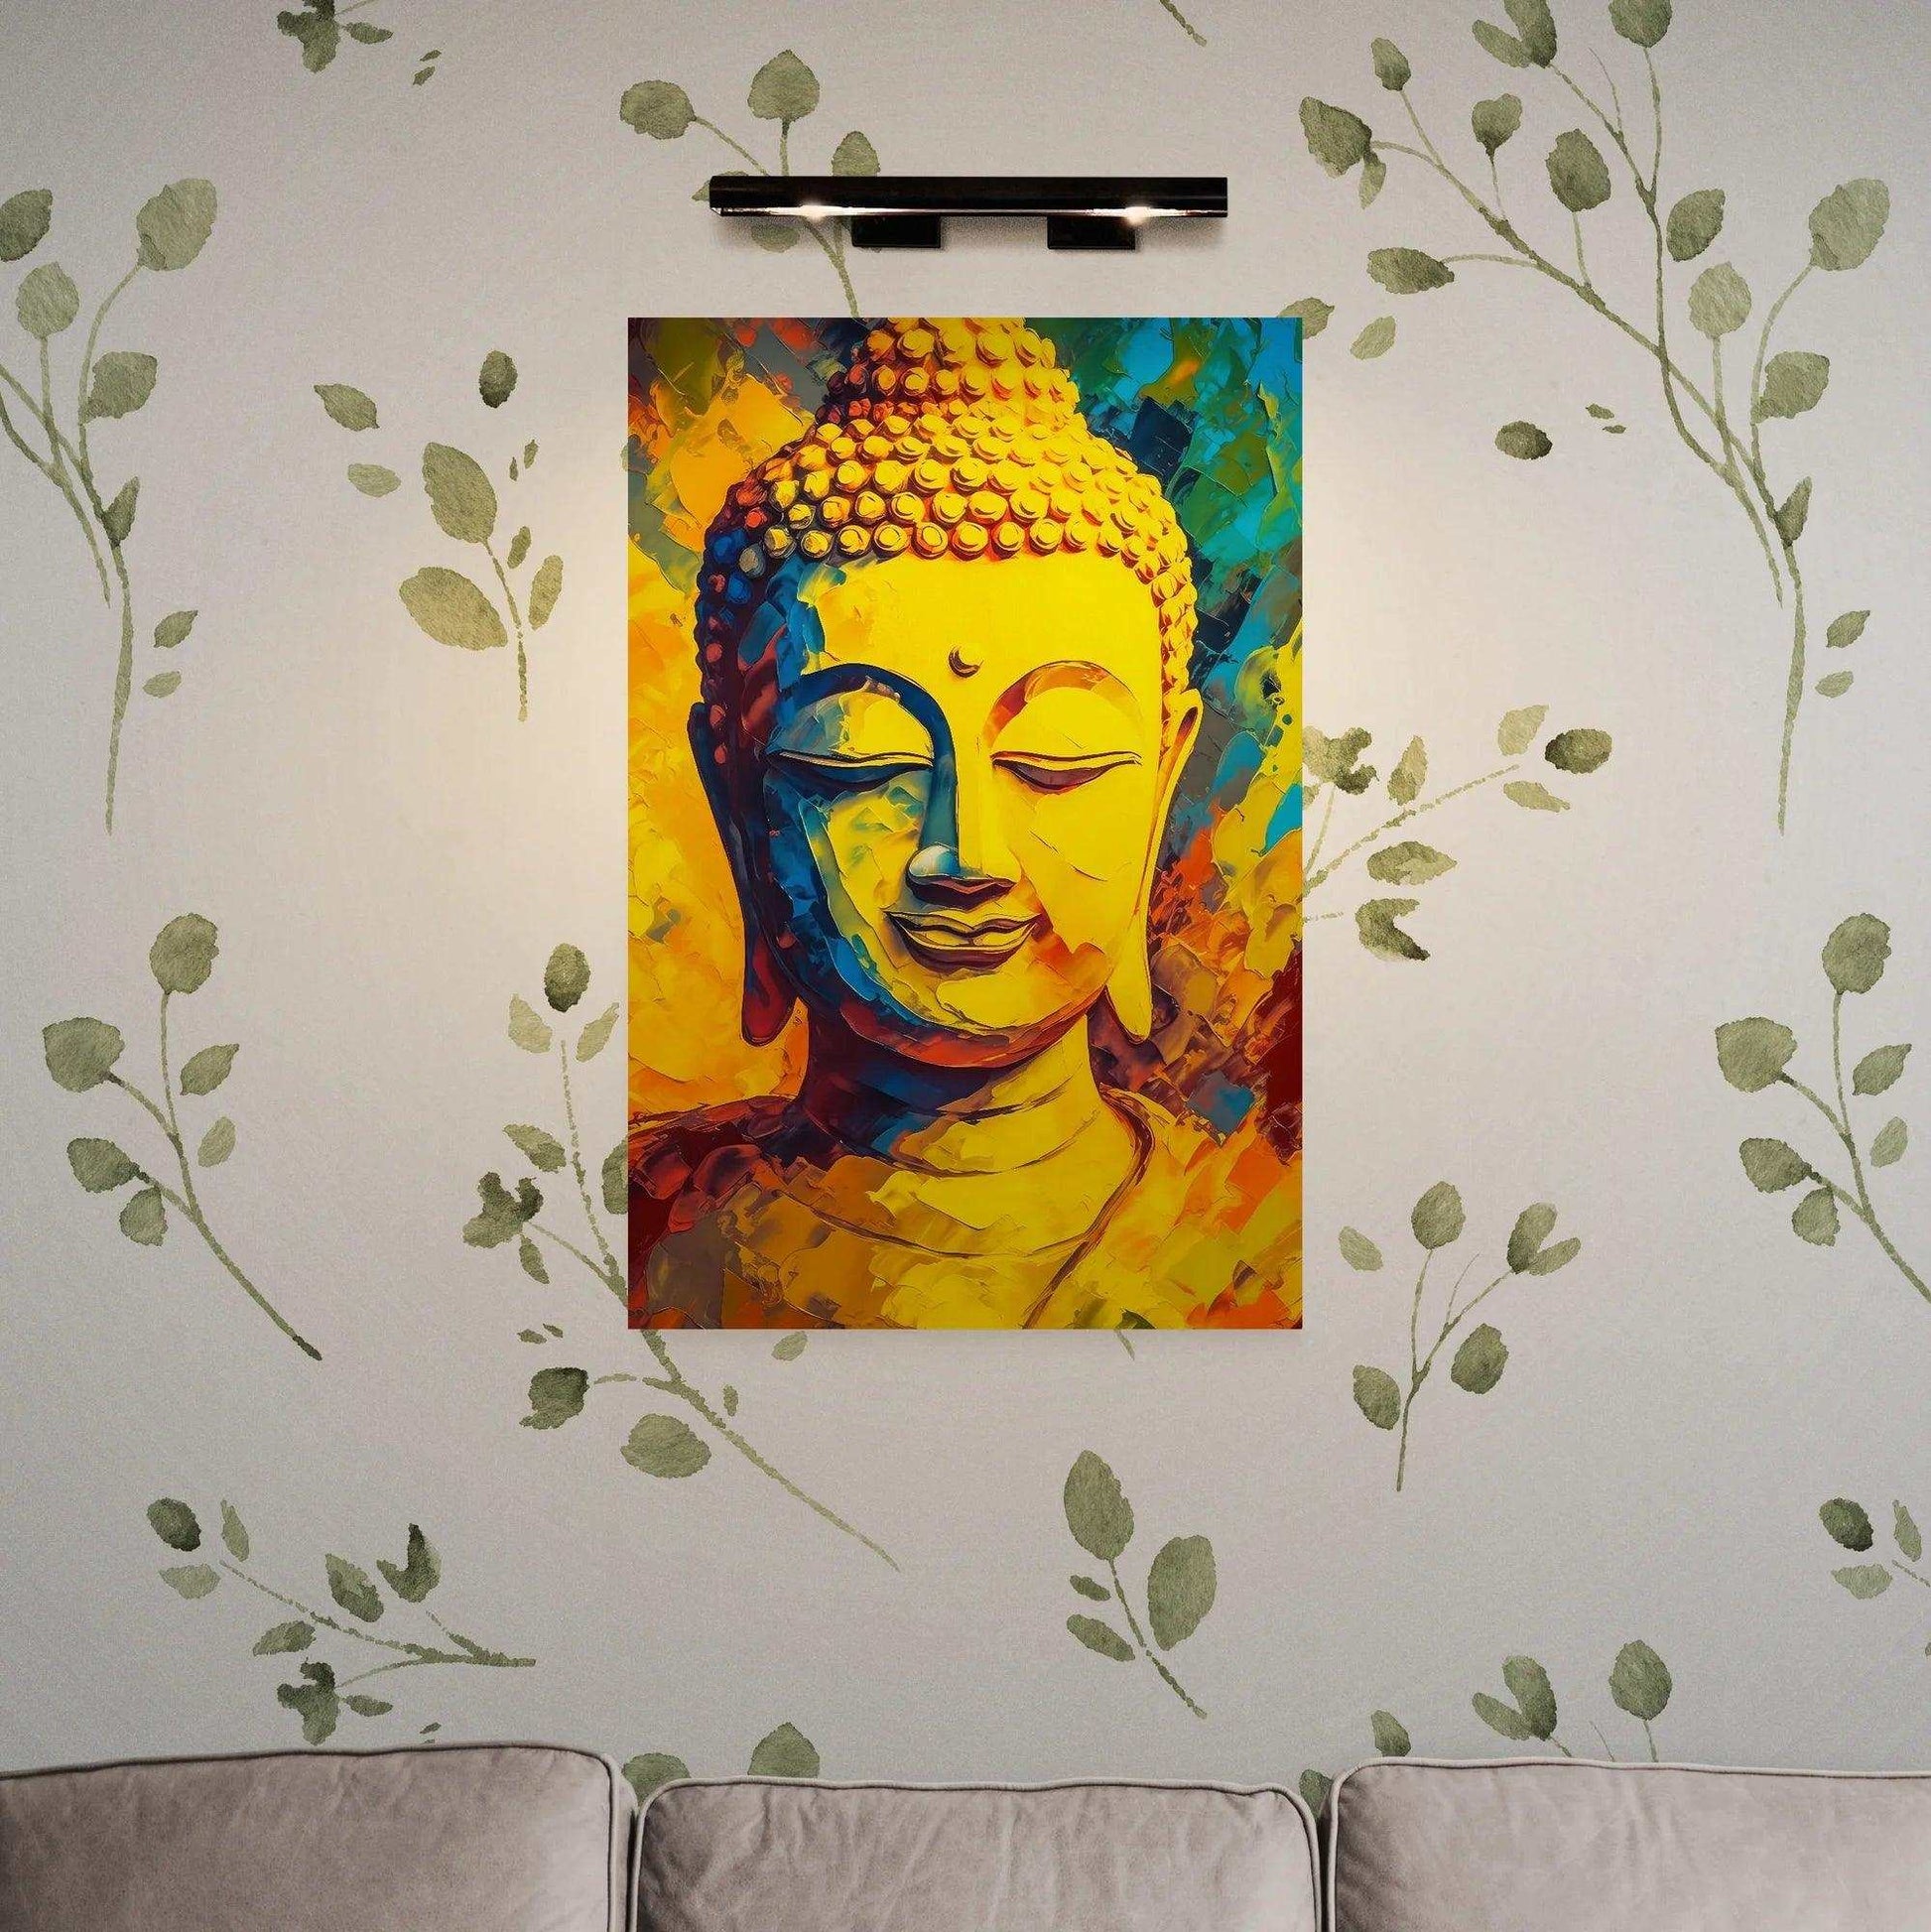 A vibrant portrait of Buddha with a serene expression in rich yellow, orange, and blue hues is mounted on a wall decorated with hand-painted green leaves, above a light grey sofa.